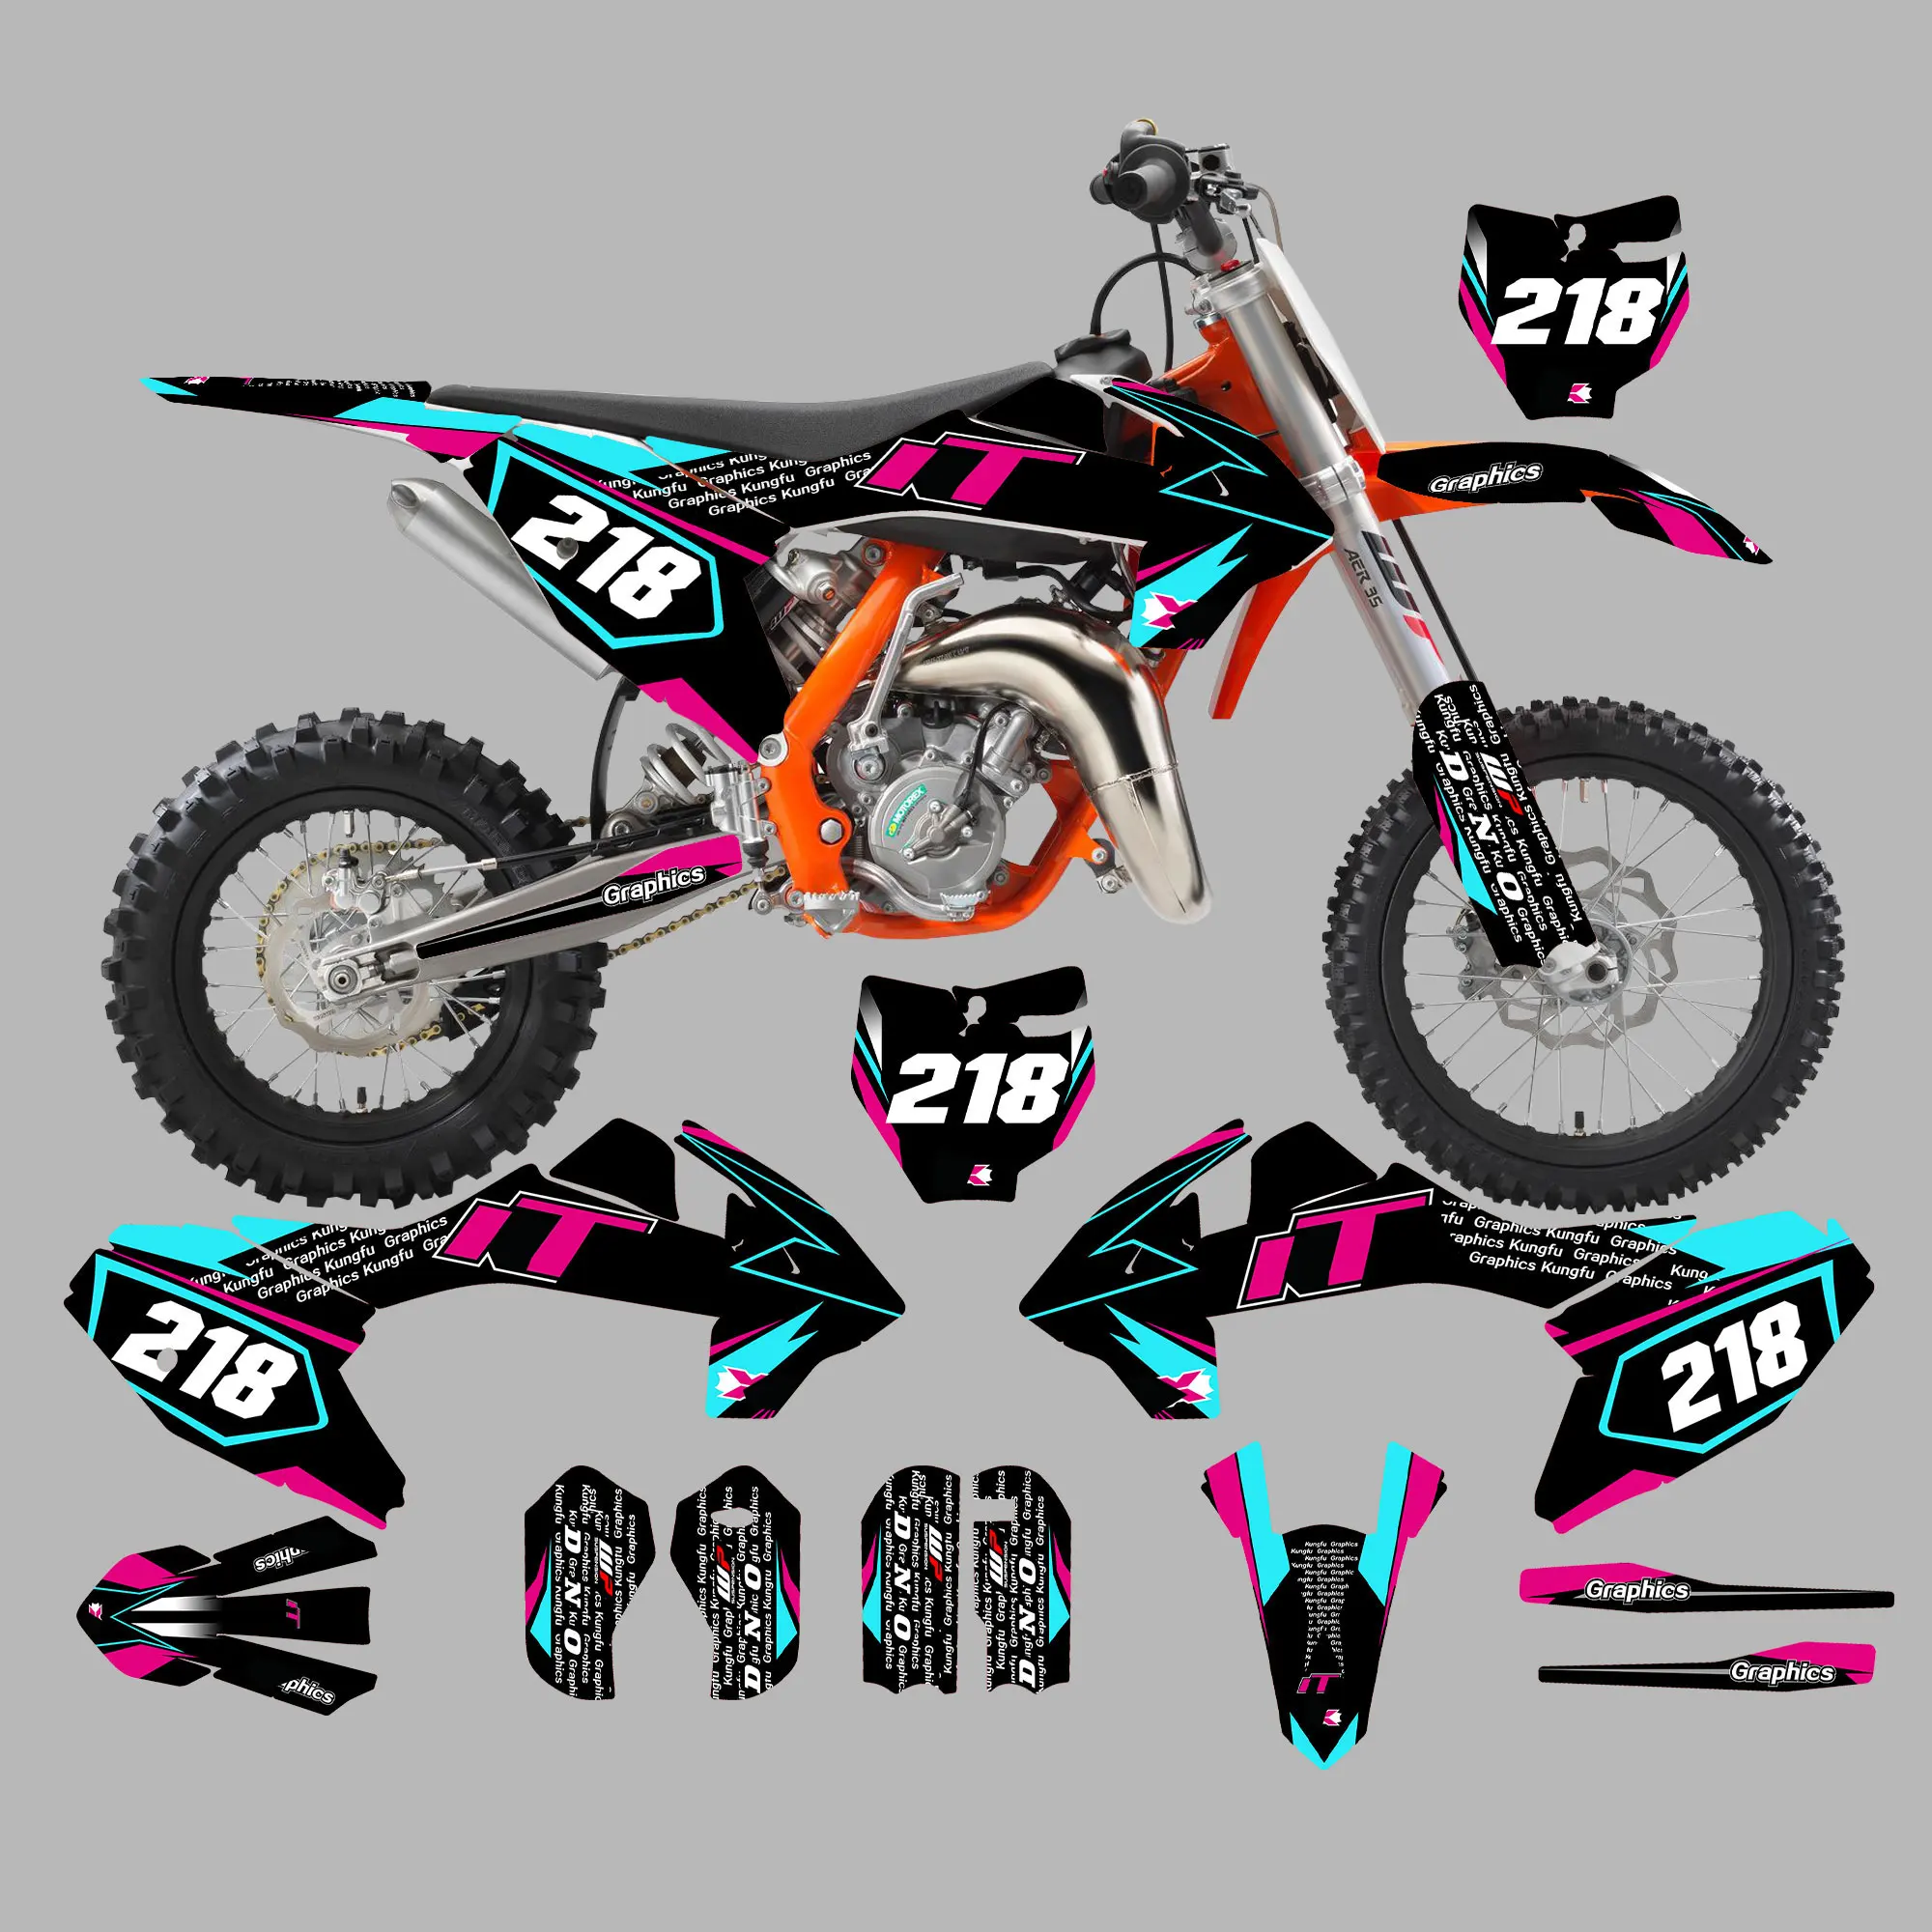 Graphic Kit for 2021 2022 MC65 SX65   2016 2017 2018 2019 2020 2021 2022 SX65  Motocross Decals Sticker mxgp 2020 the official motocross videogame pc